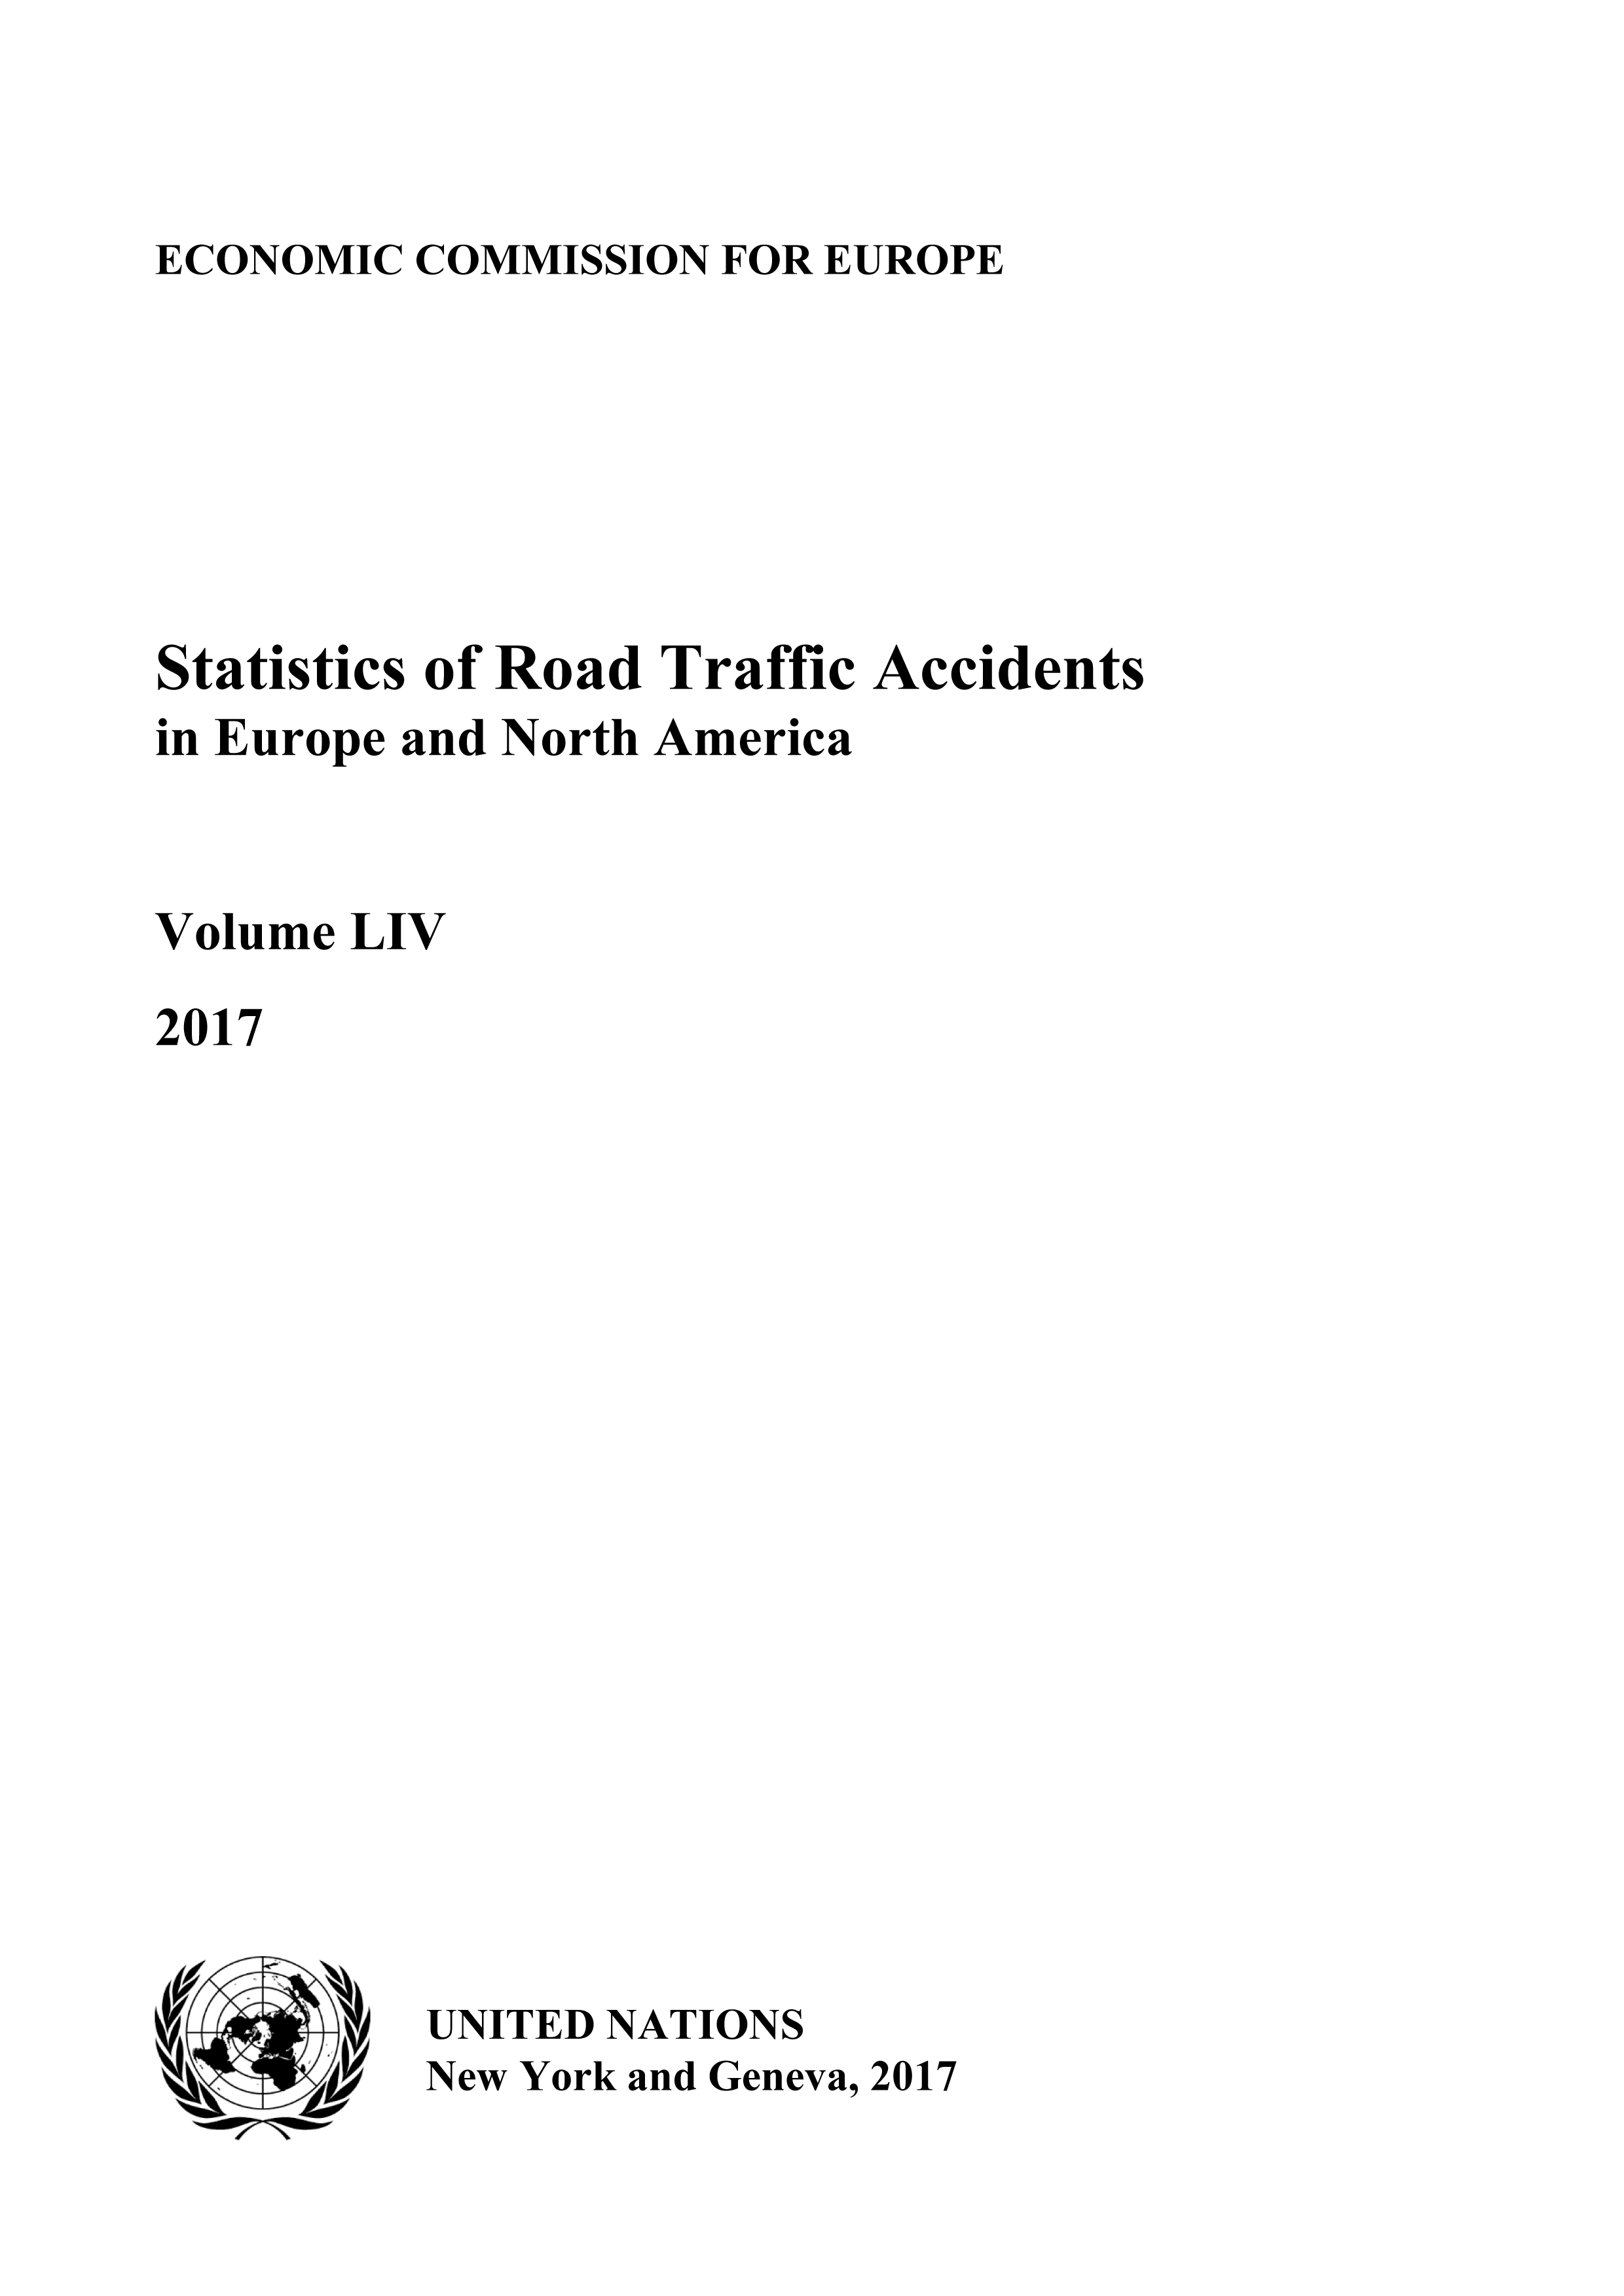 image of Statistics of Road Traffic Accidents in Europe and North America 2017